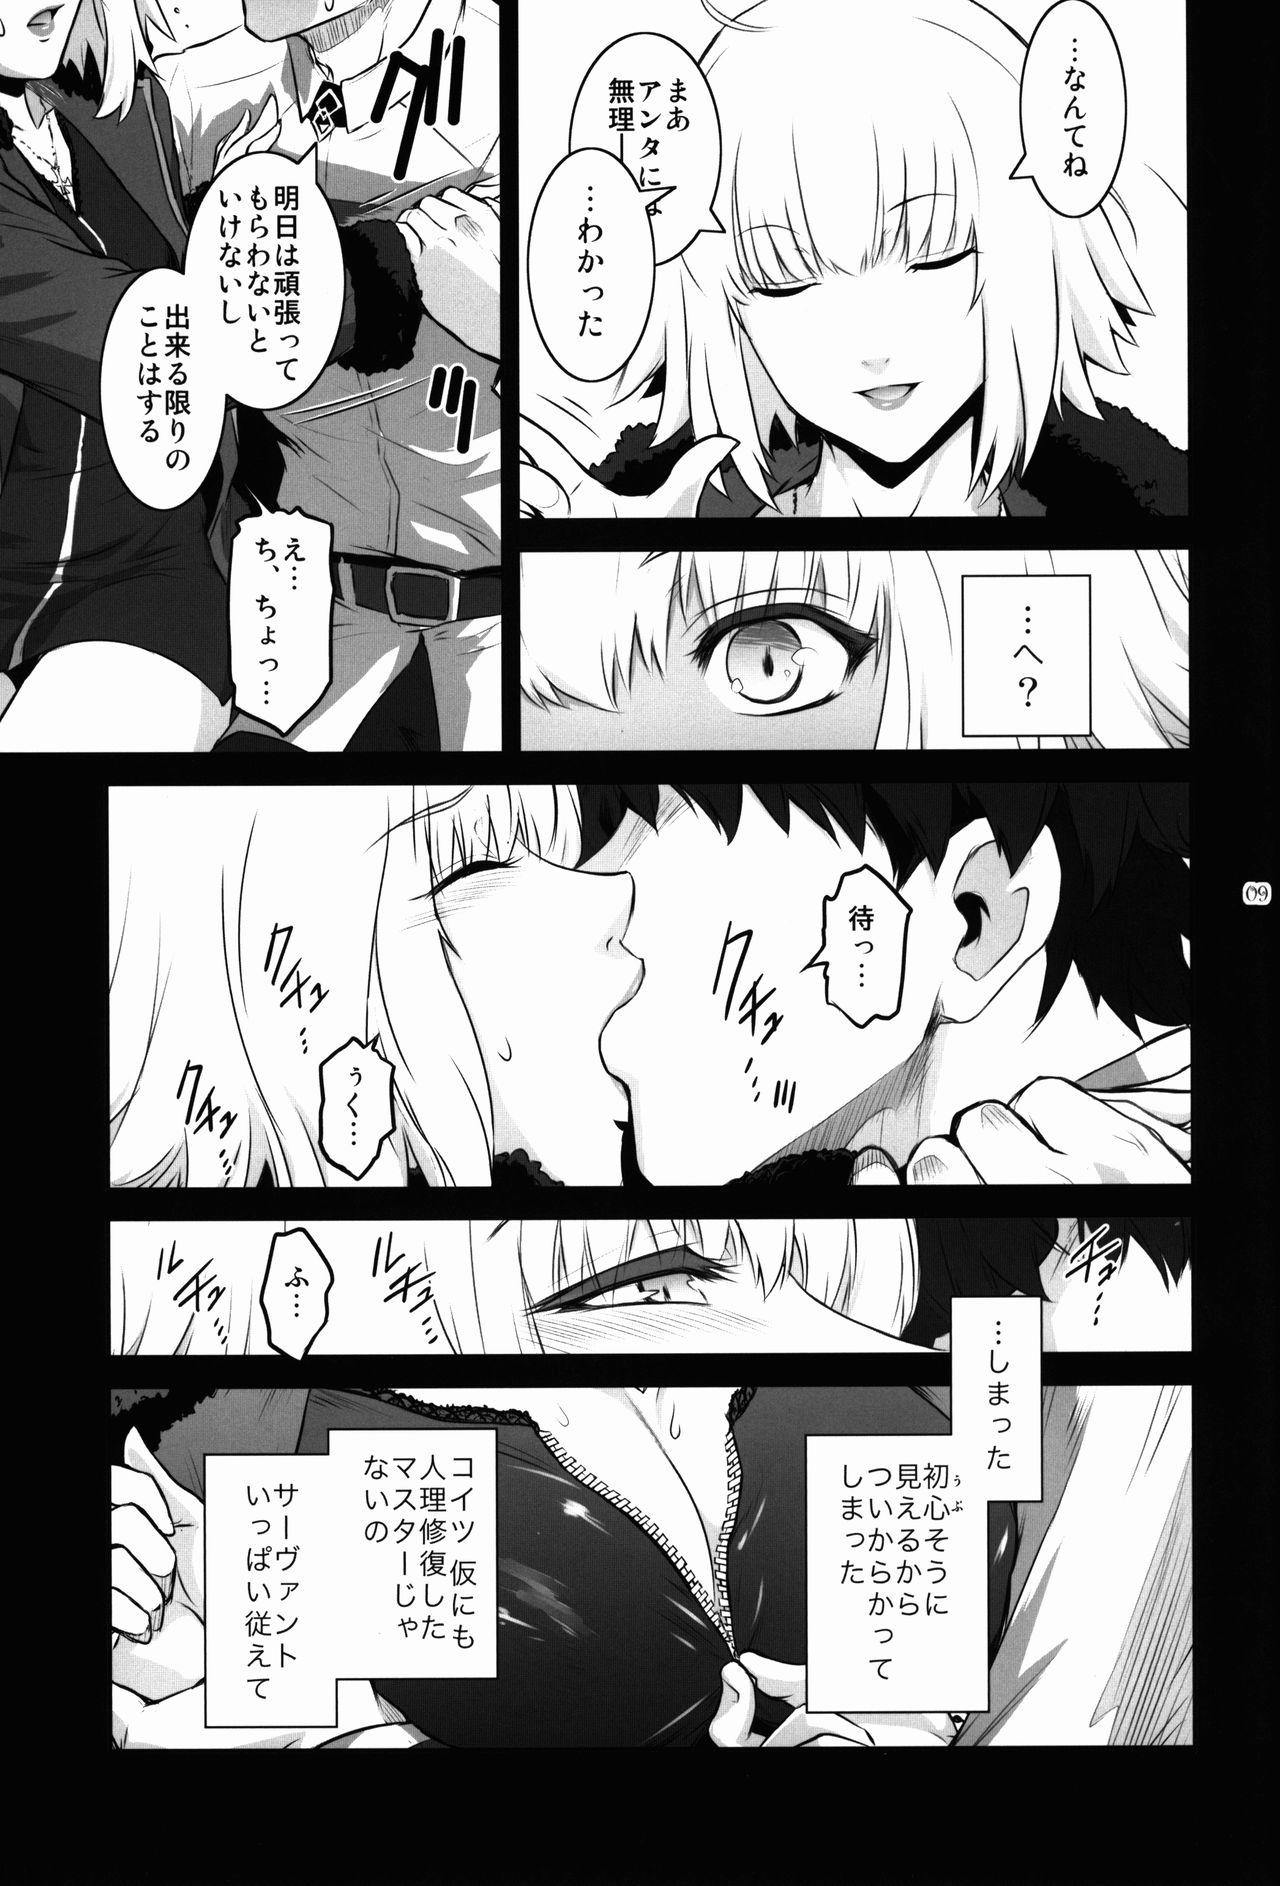 Free Amature Porn MANHUNT - Fate grand order Slapping - Page 9